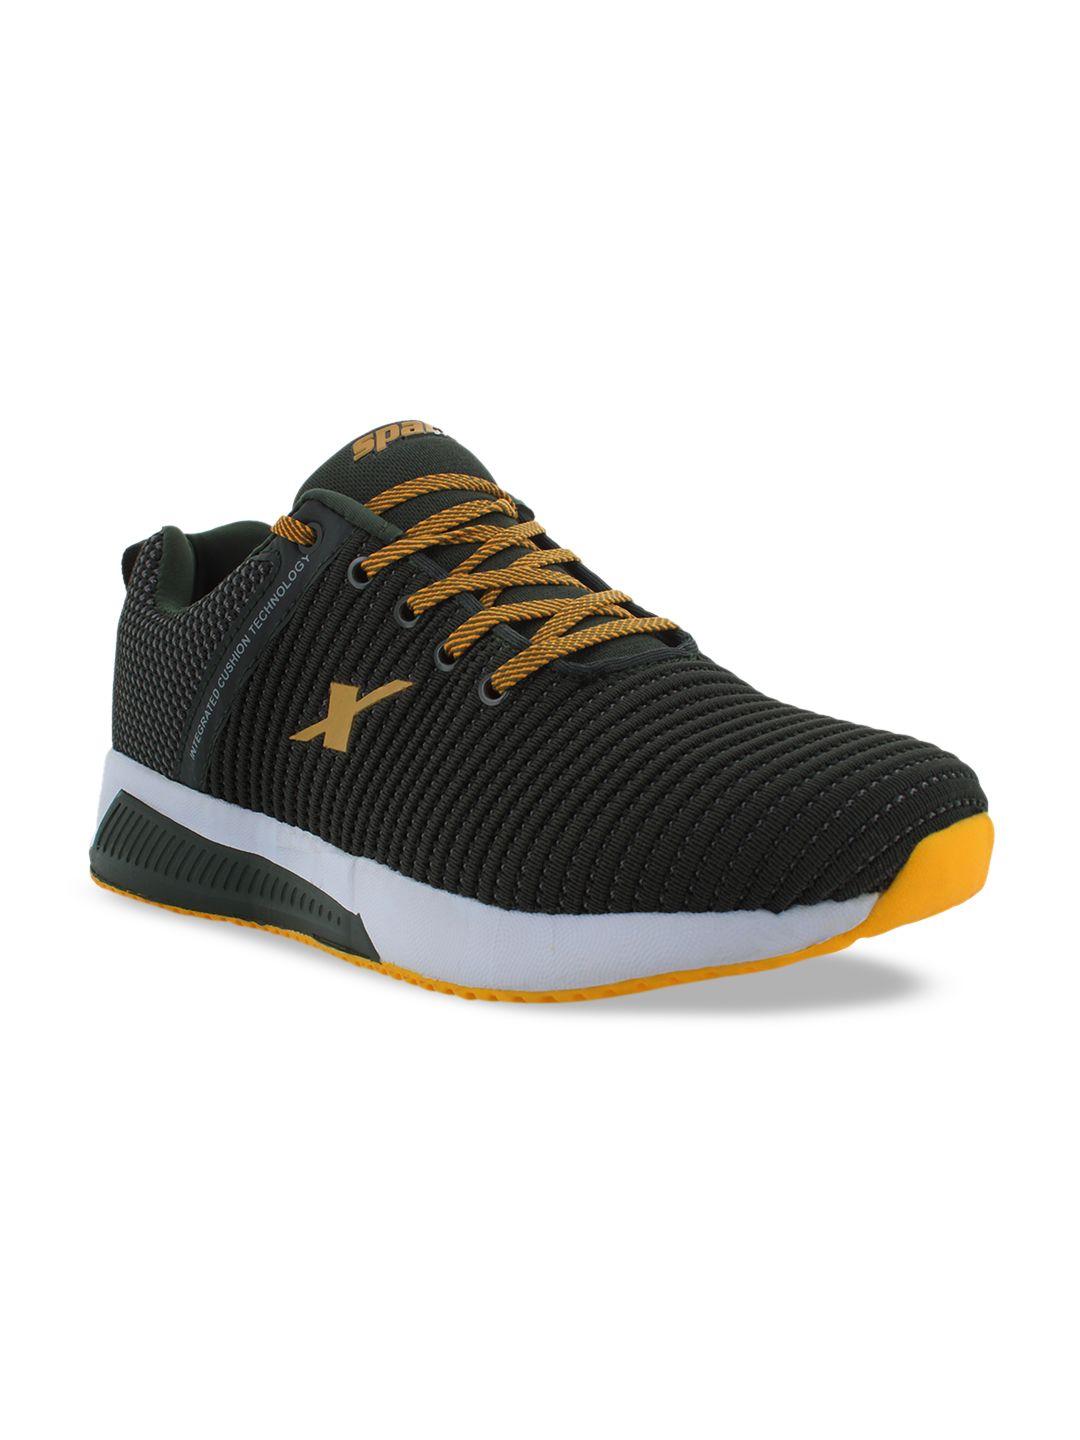 sparx-men-charcoal-grey-running-shoes